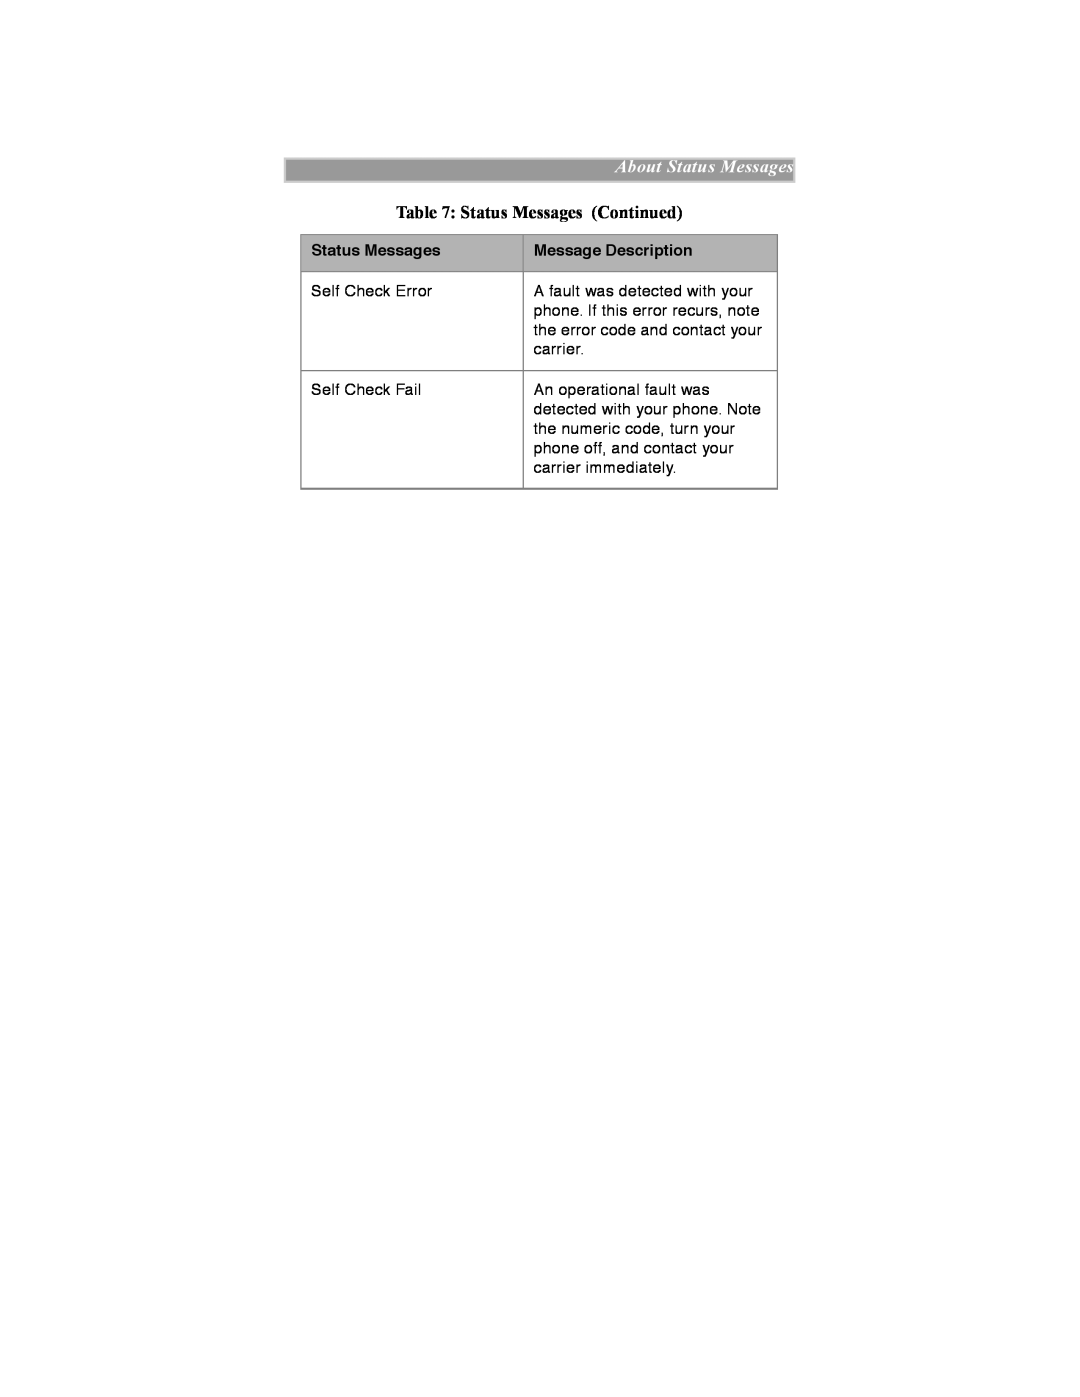 Motorola iDEN manual About Status Messages, Status Messages Continued 